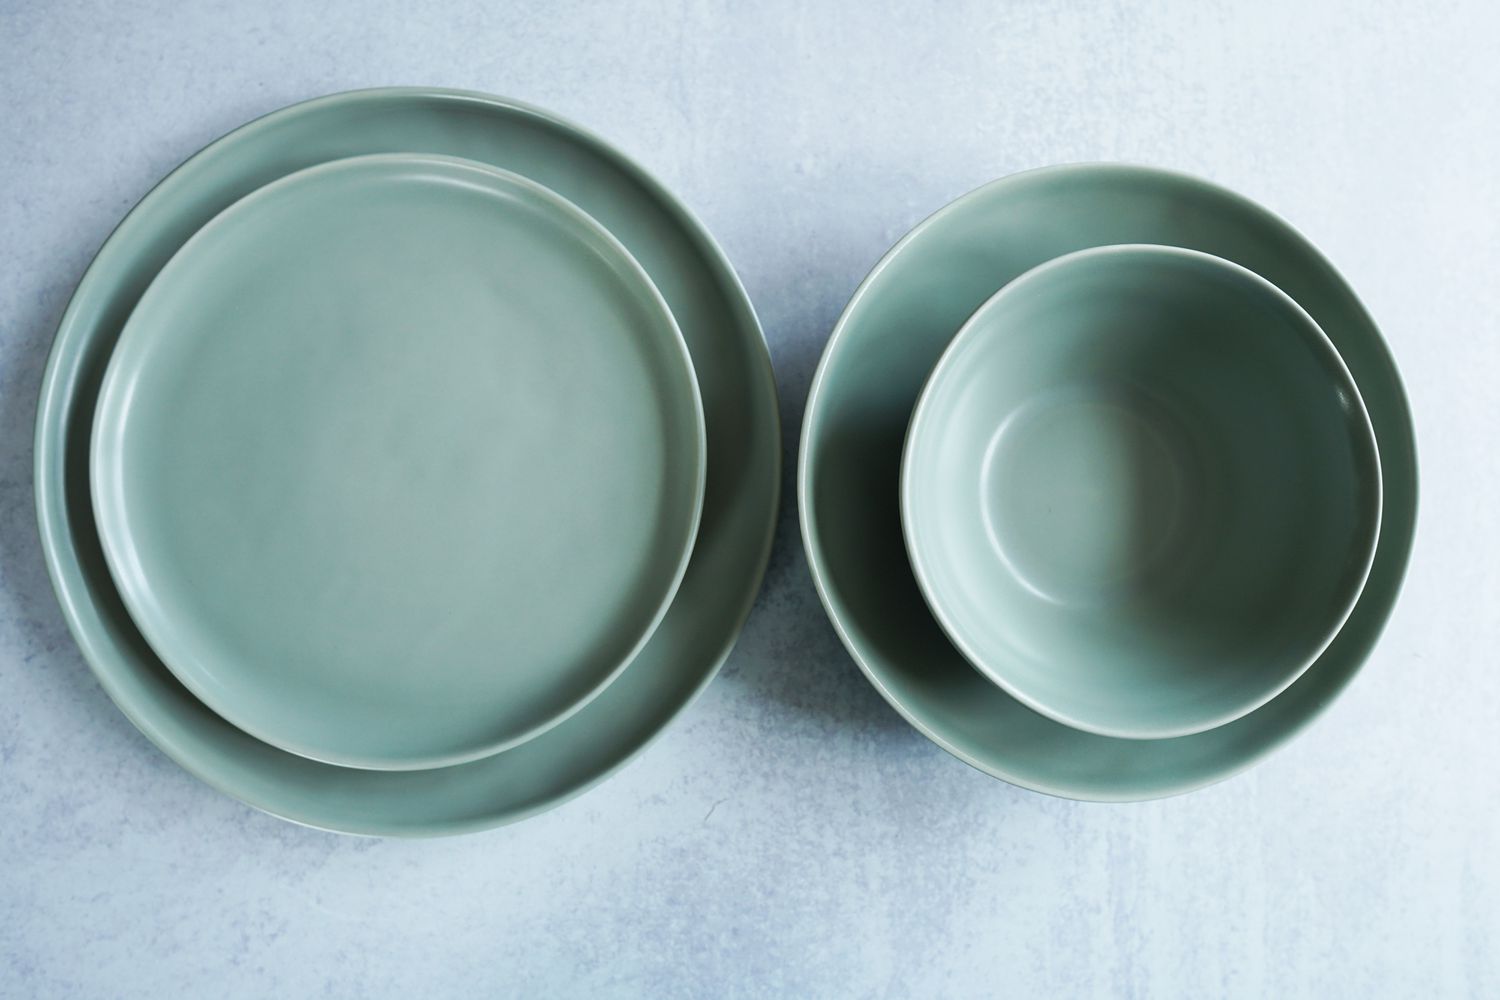 two green bowls and plates on a grey surface